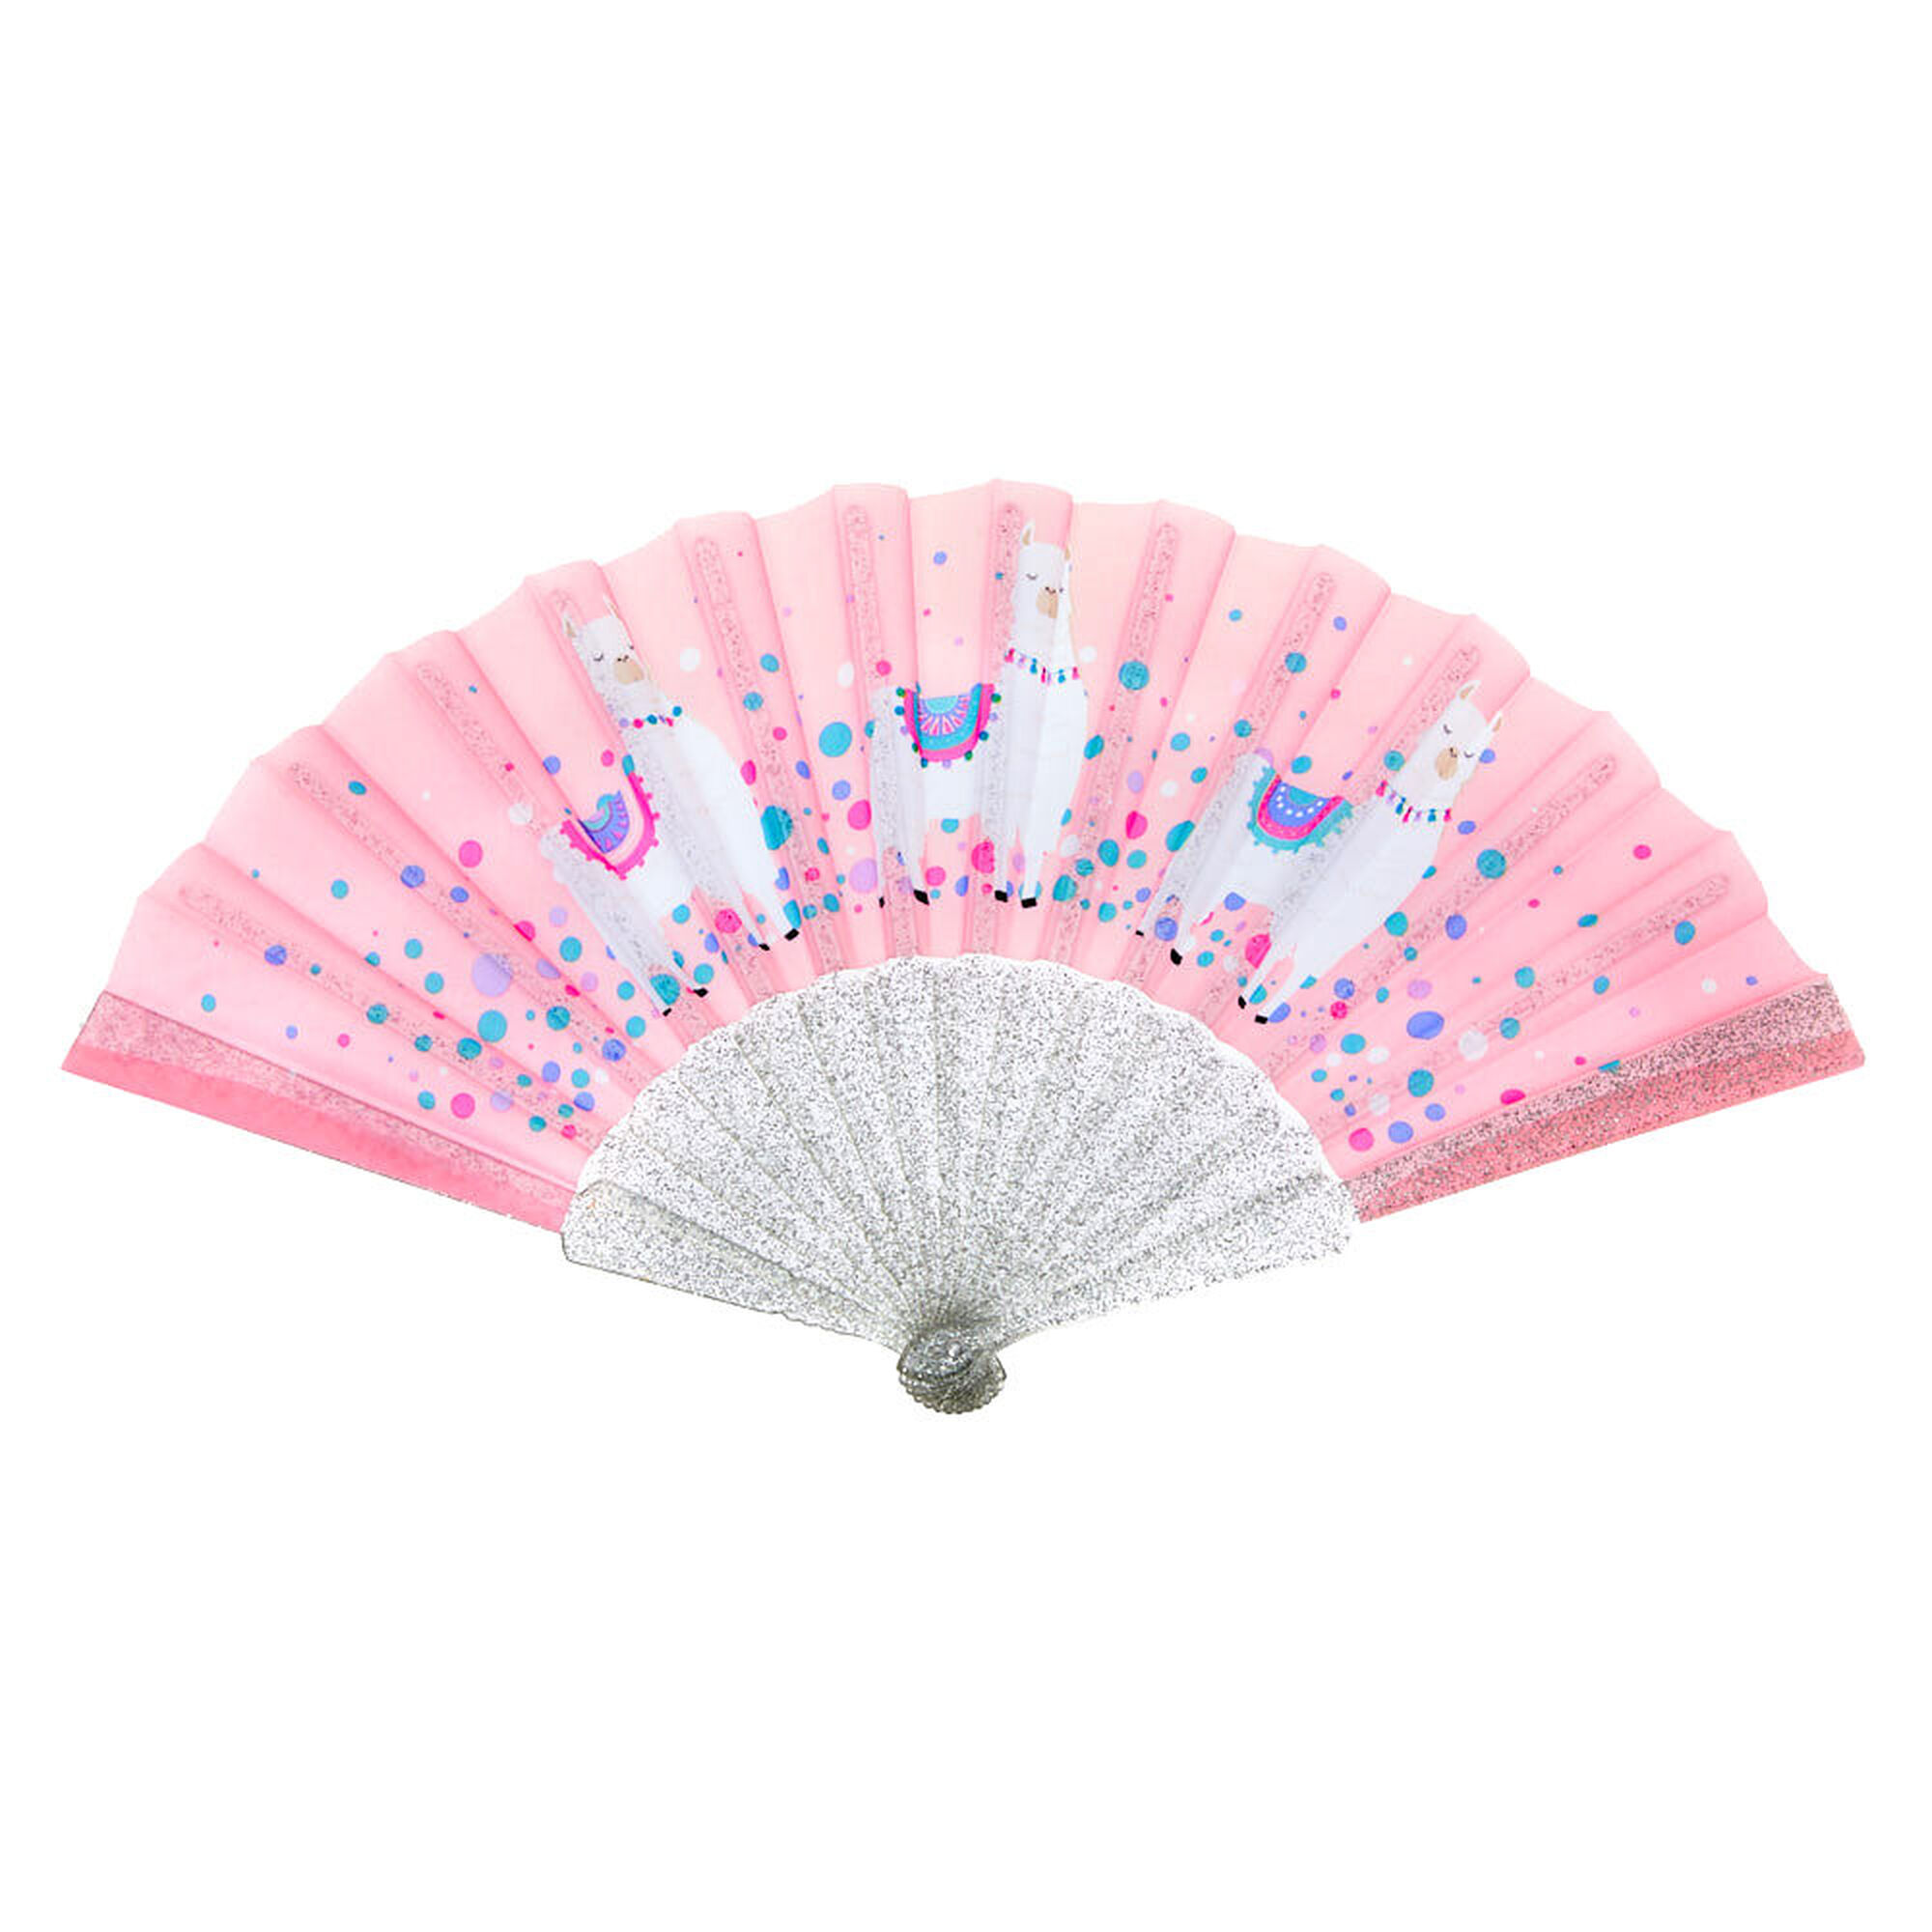 View Claires Llama Folding Fan Pink information